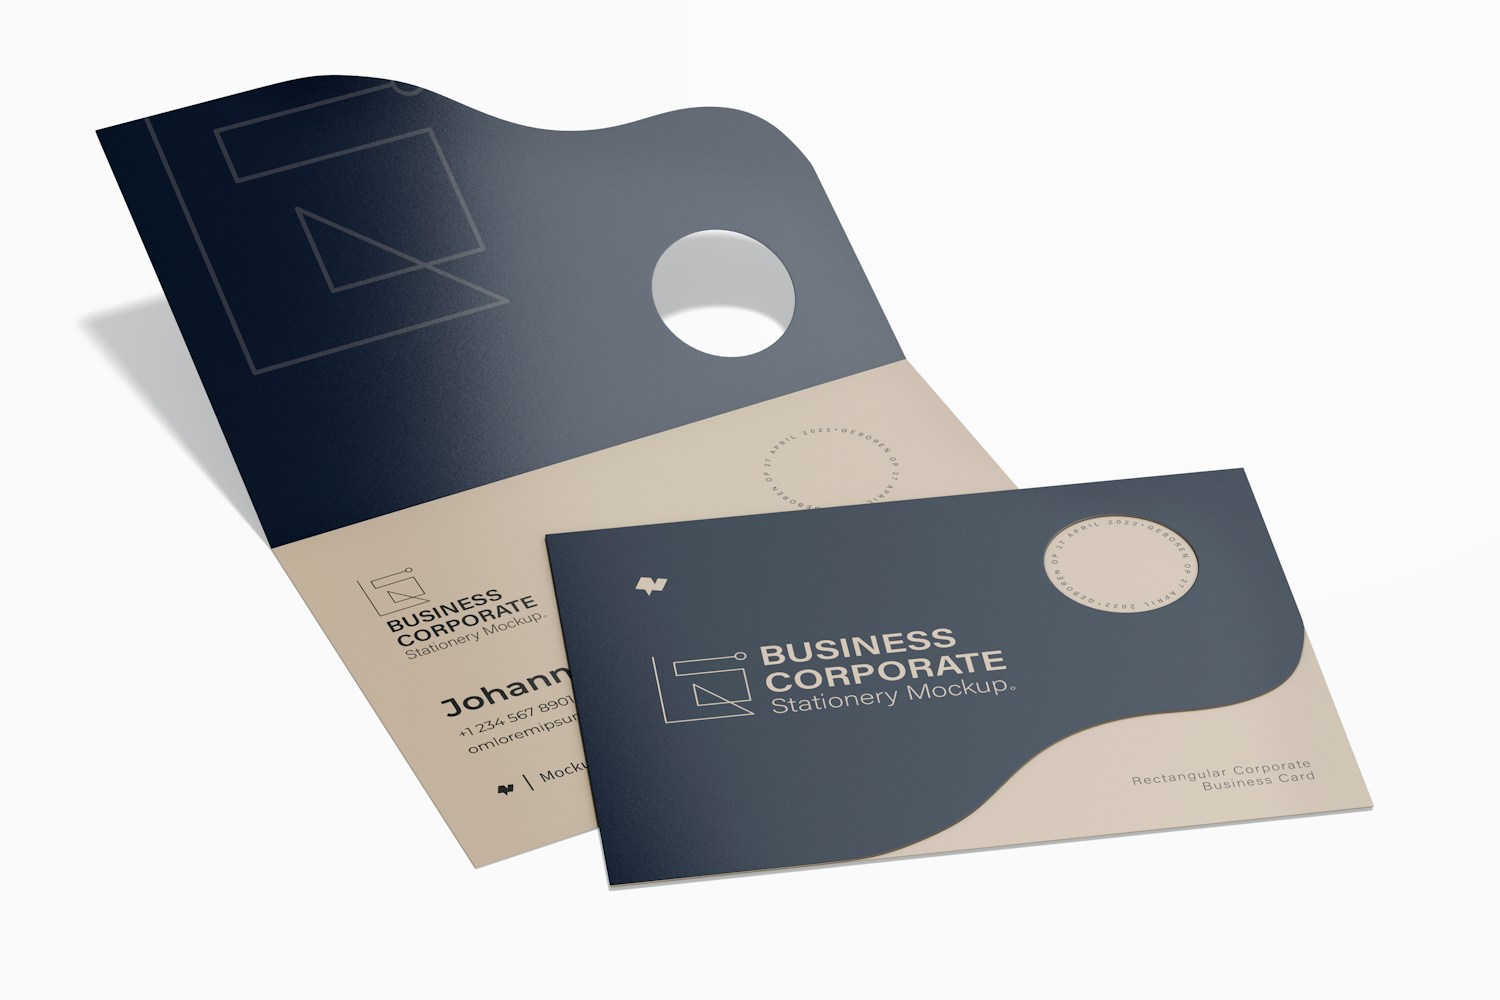 Rectangular Corporate Business Cards Mockup, Opened and Closed